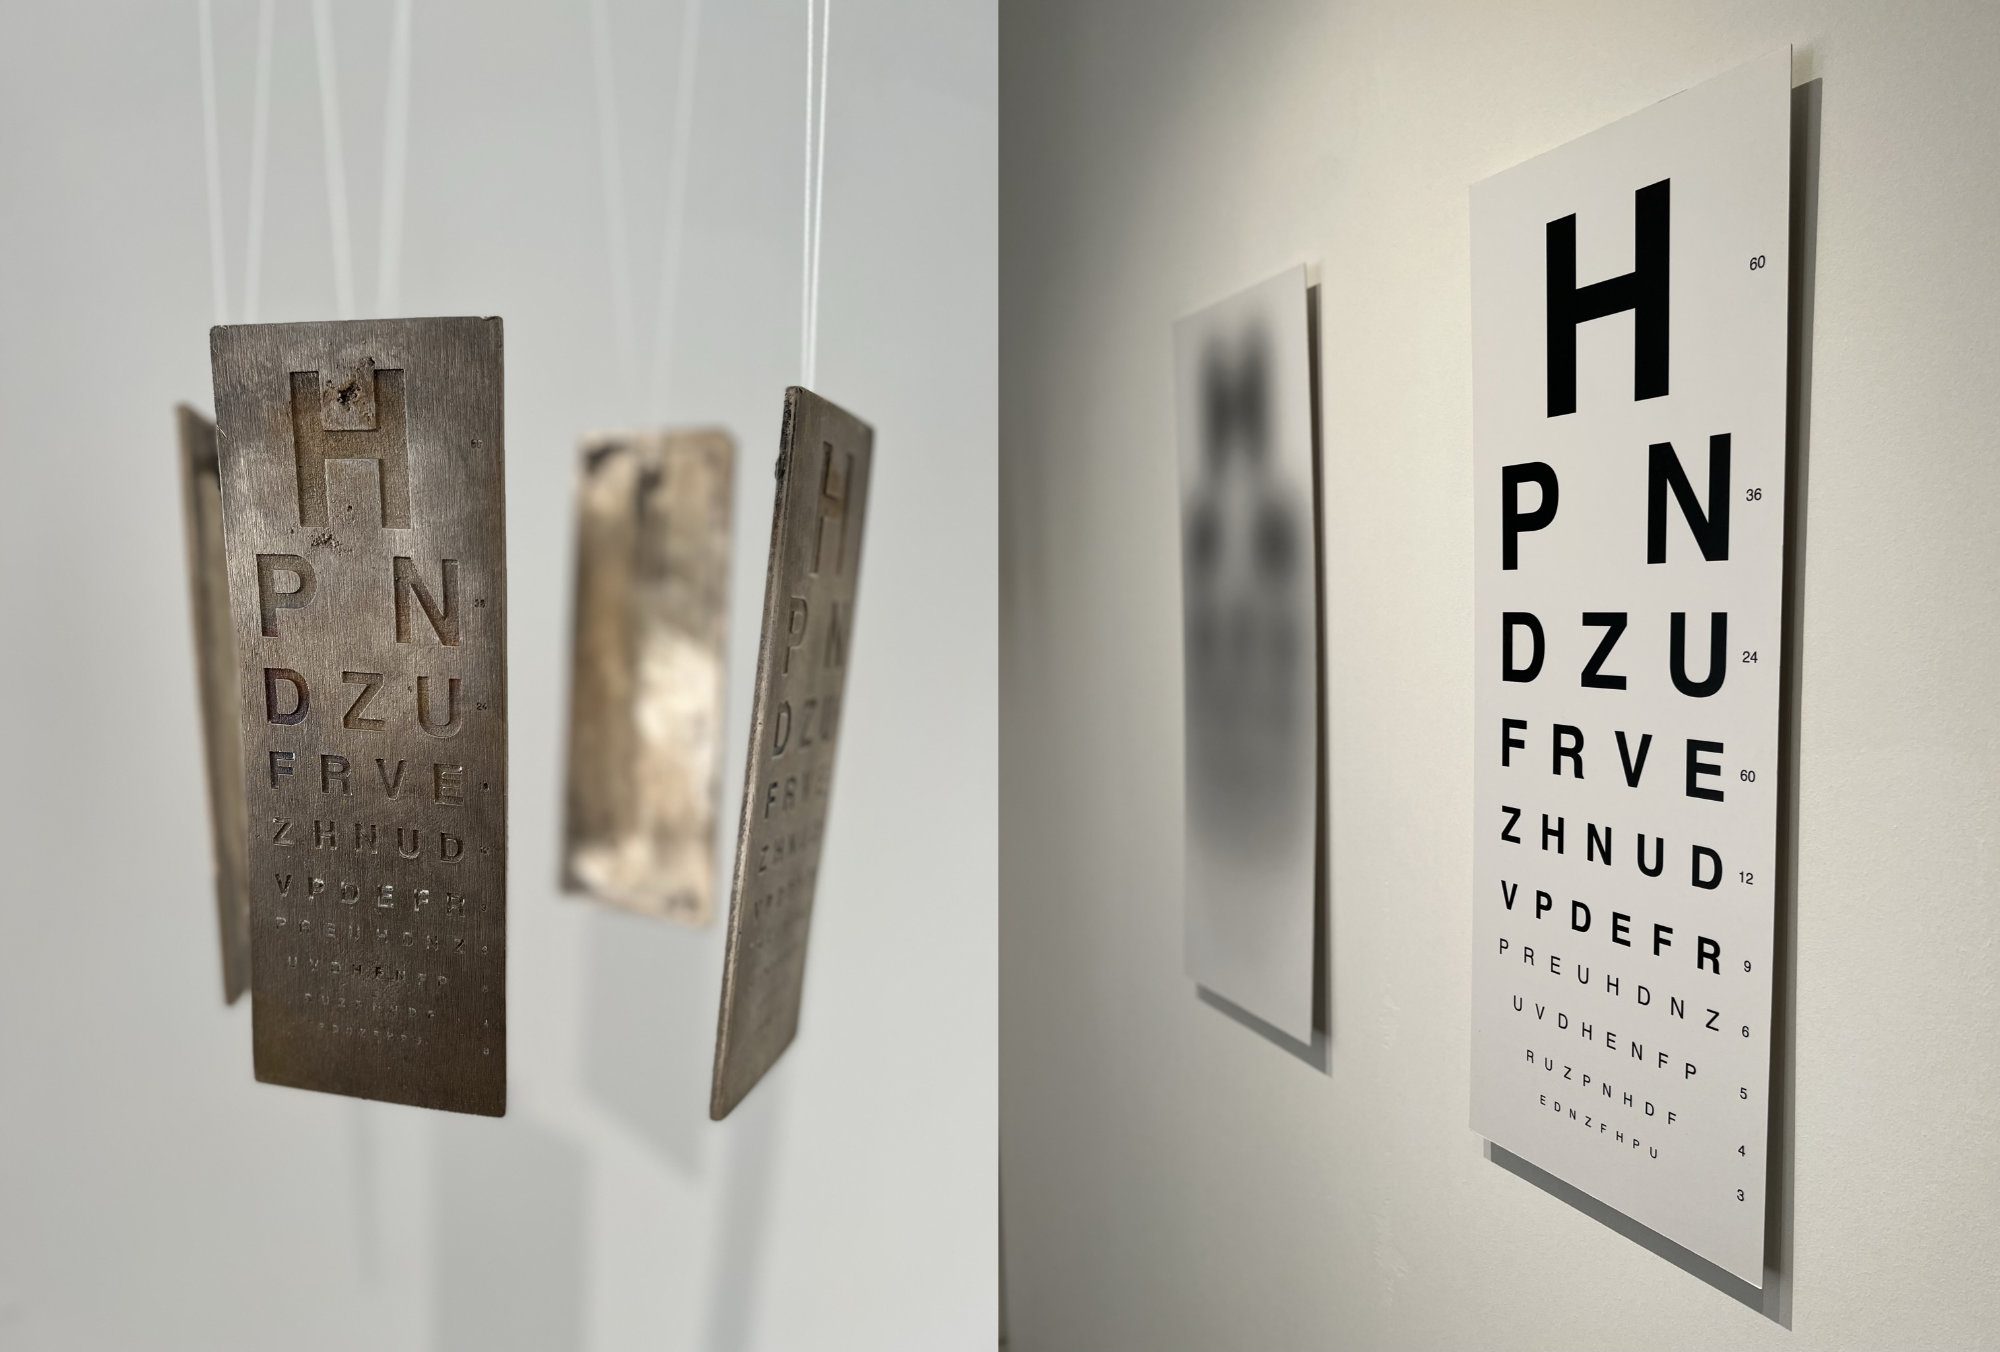 The rightmost image shows two white Snellen charts used by opticians. They are aligned side by side. The chart on the left hand side shows distorted and blurred shapes which are assumed to be the blurred letters of the chart. Whilst the second chart on the right hand side shows the lettering perfectly crisp and clean. In the leftmost image, a 4-piece metallic mobile is shown with engraved Snellen charts hanging from the ceiling.